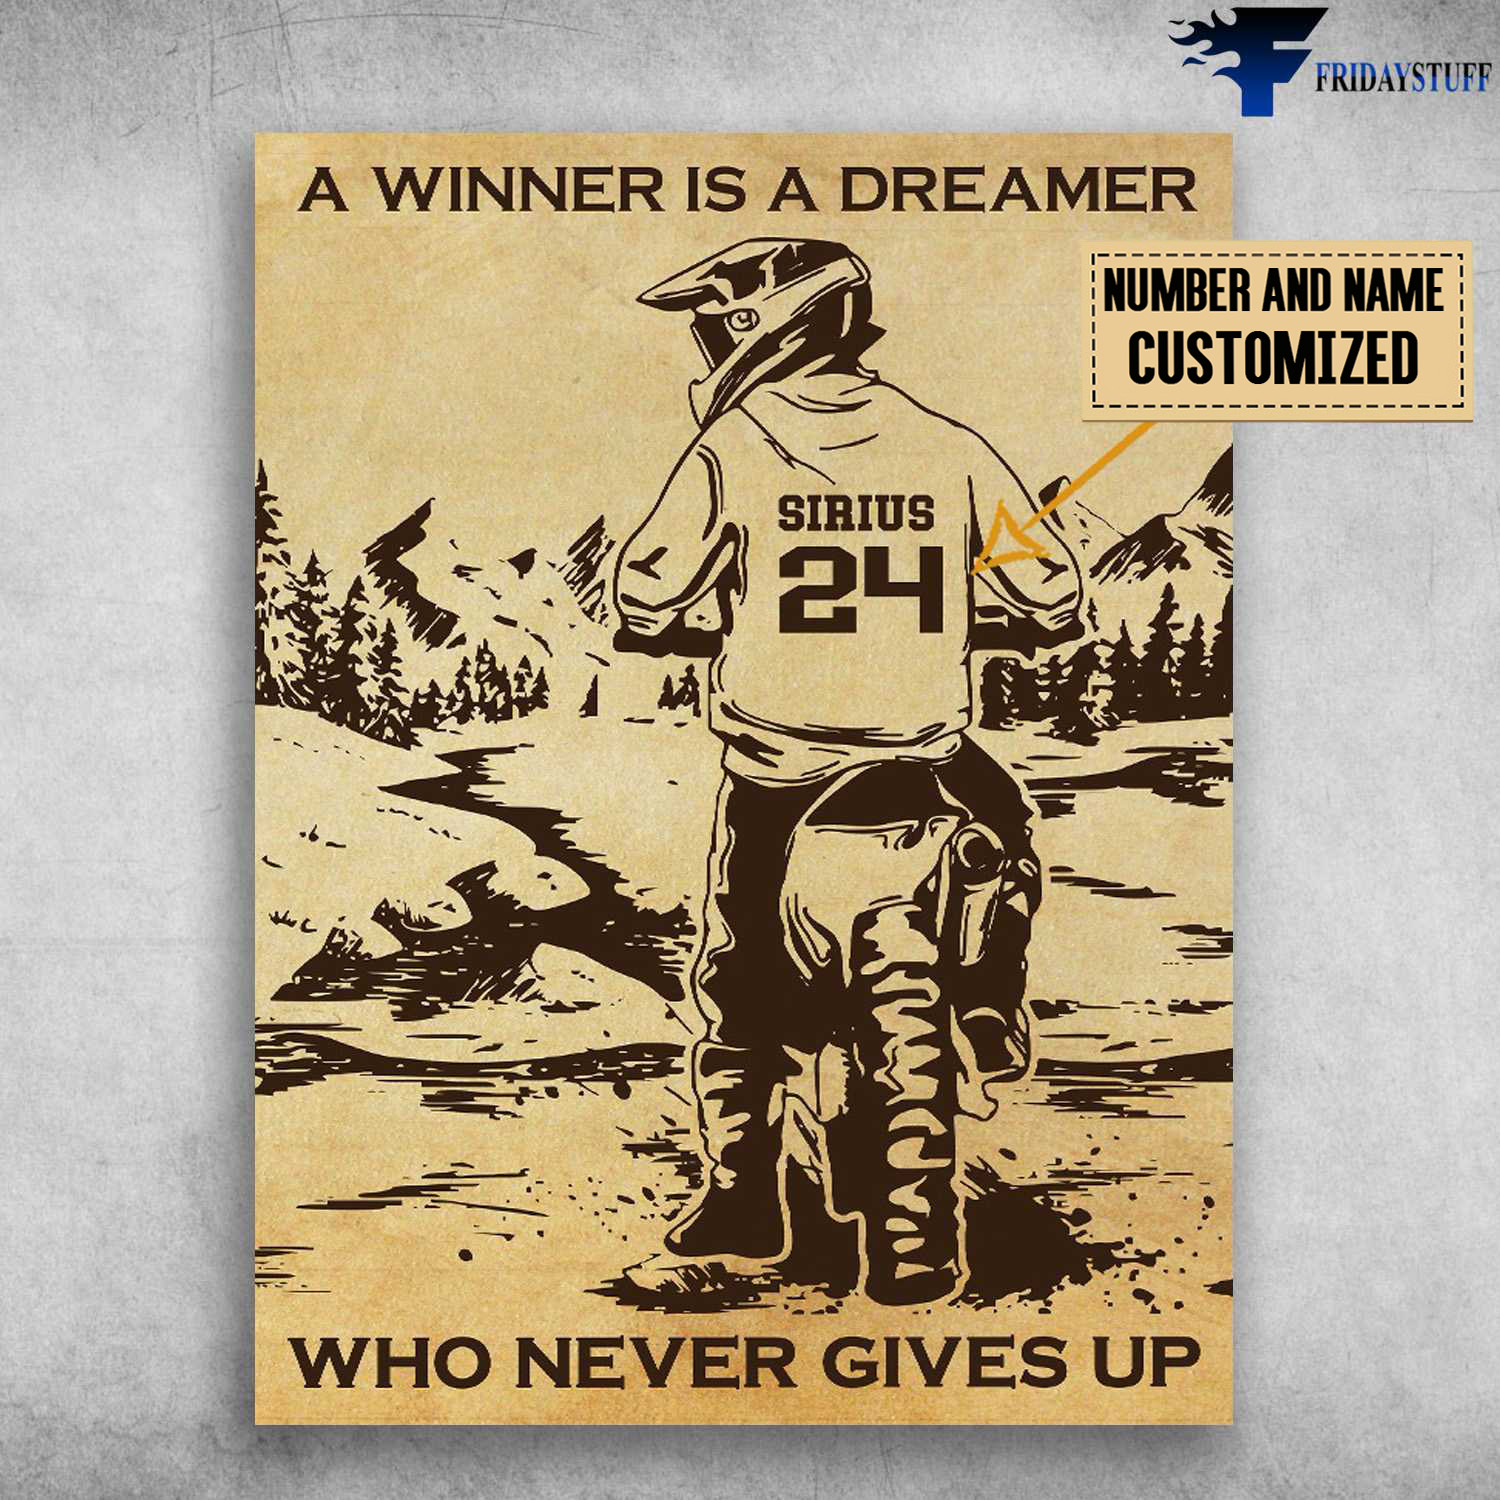 Motocross Man, Dirtbike Poster, A Winner Is A Dreamer, Who Never Gives Up